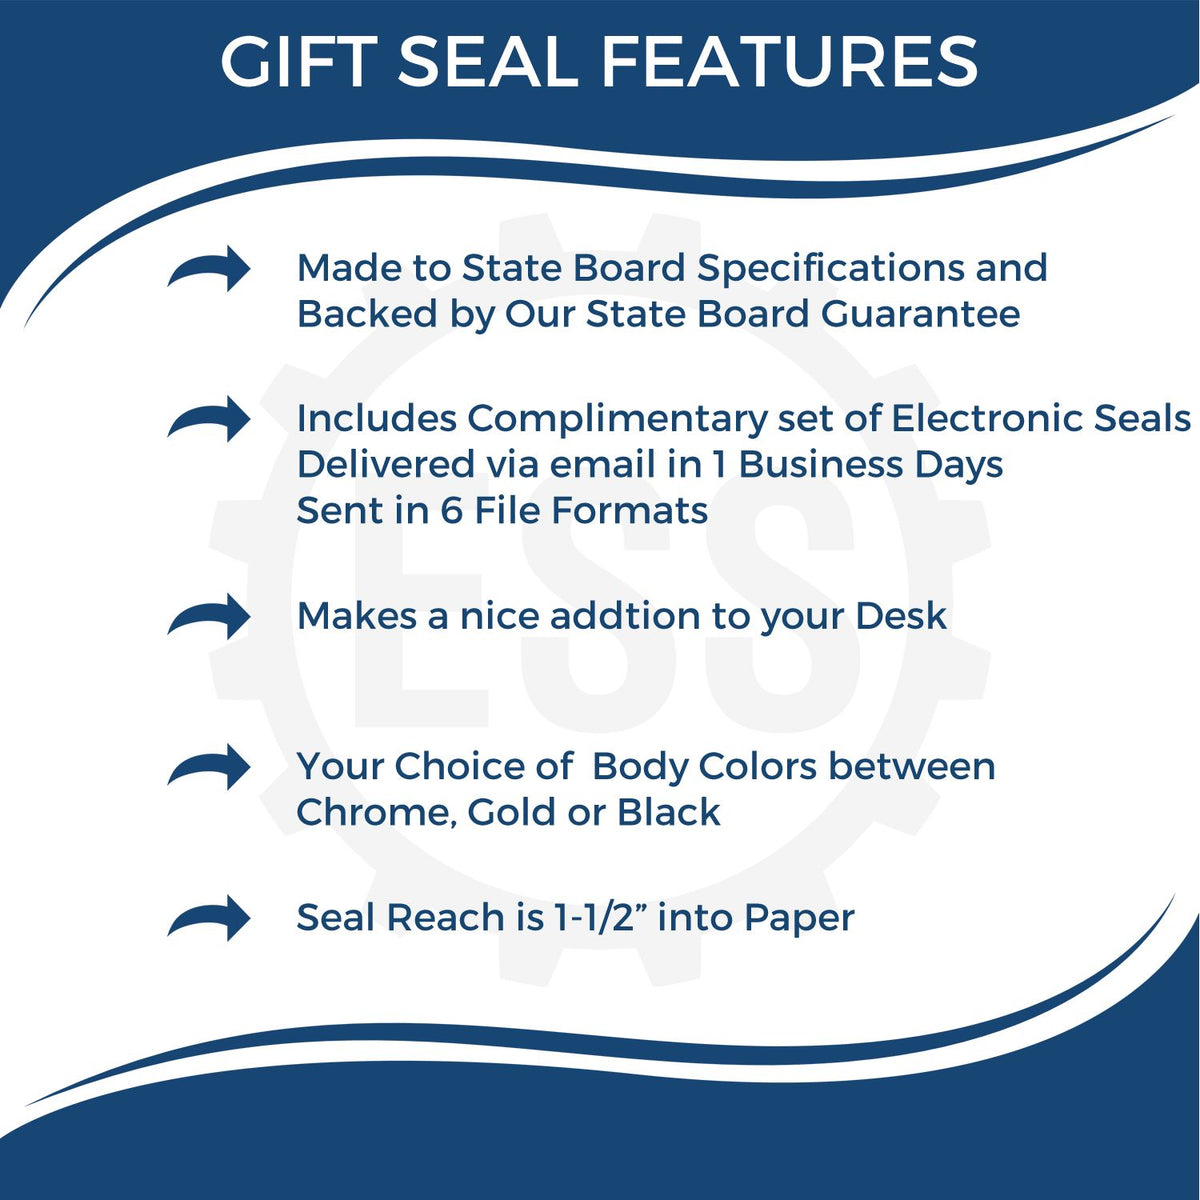 A picture of an infographic highlighting the selling points for the Gift Oregon Geologist Seal